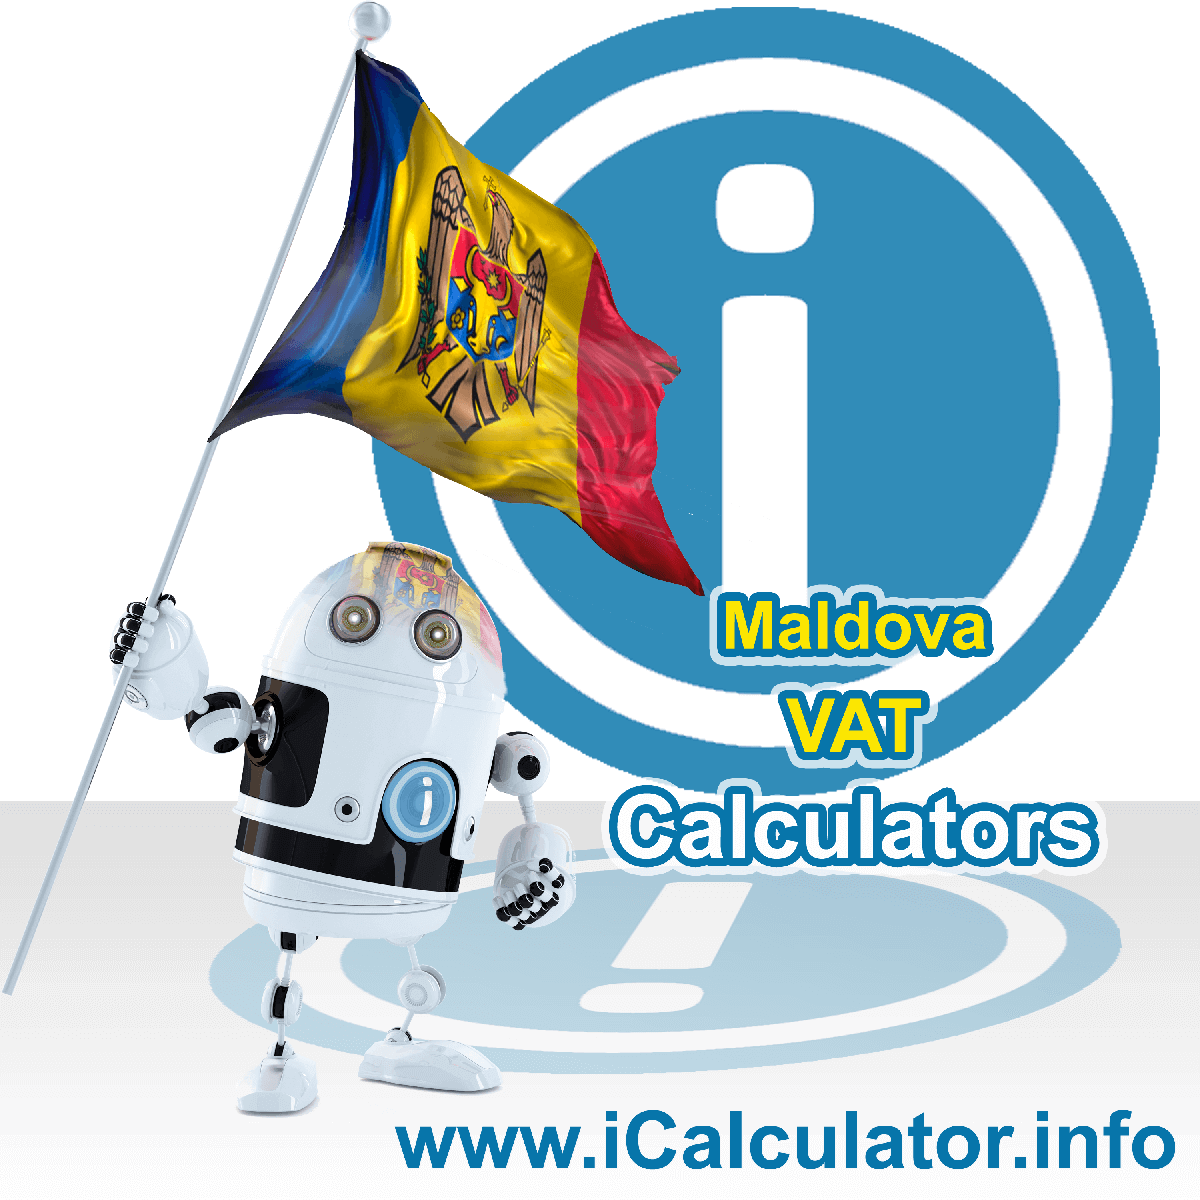 Moldova VAT Calculator. This image shows the Moldova flag and information relating to the VAT formula used for calculating Value Added Tax in Moldova using the Moldova VAT Calculator in 2023